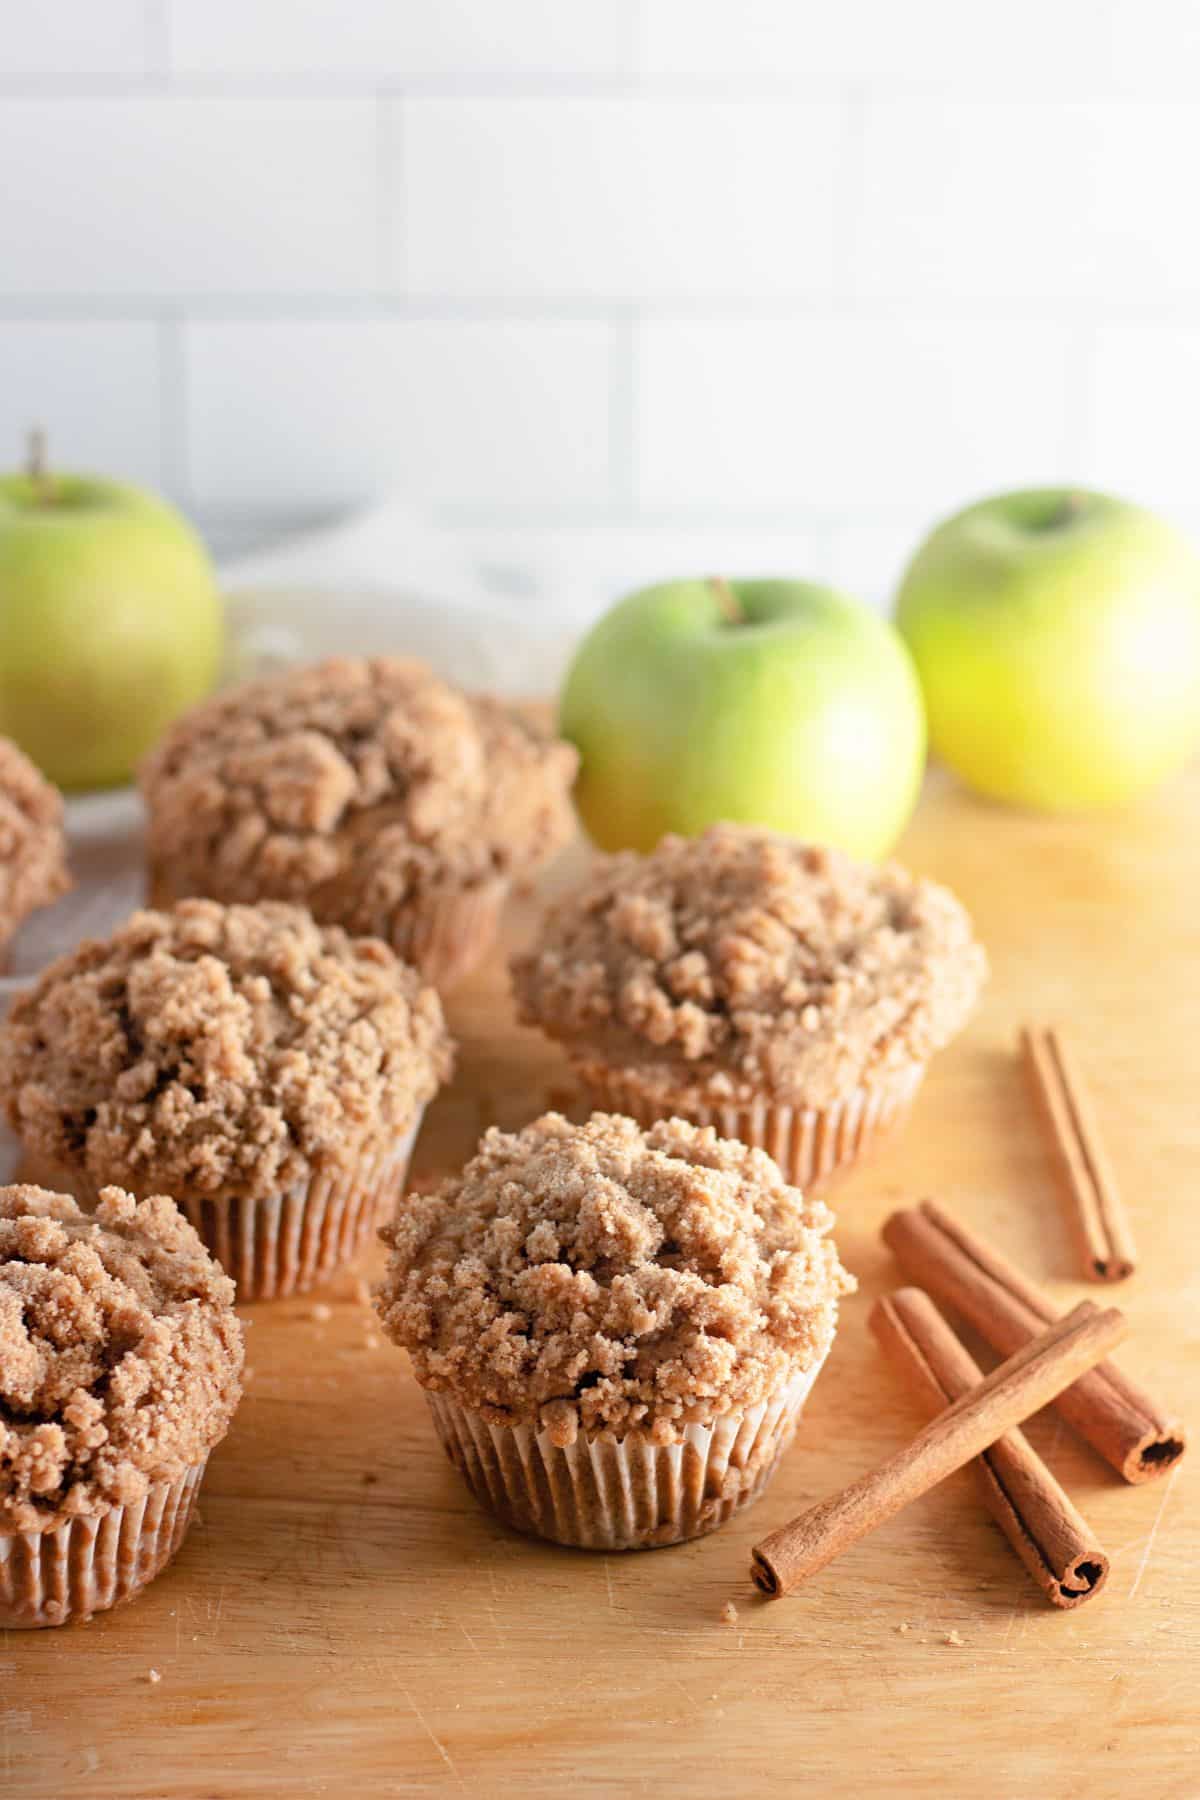 The Apple Cinnamon Muffins are on a wooden cutting board.